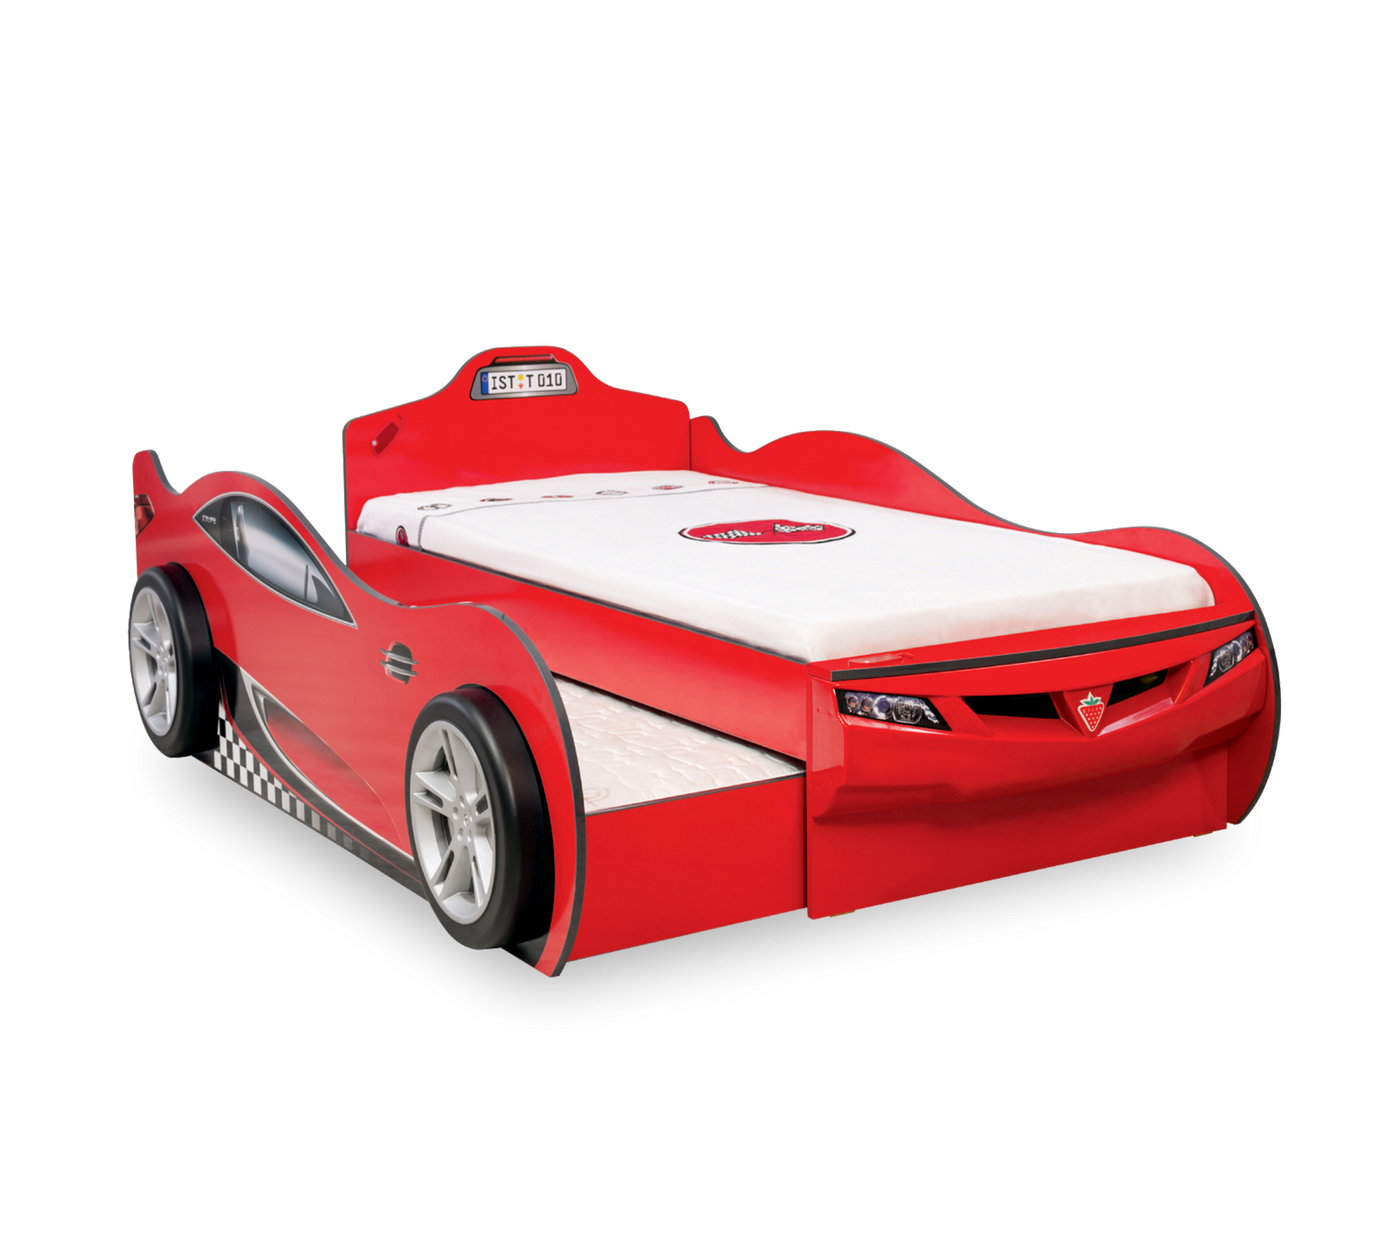 Coupe Carbed [With Friend Bed] [Red] [90x190 - 90x180 Cm]